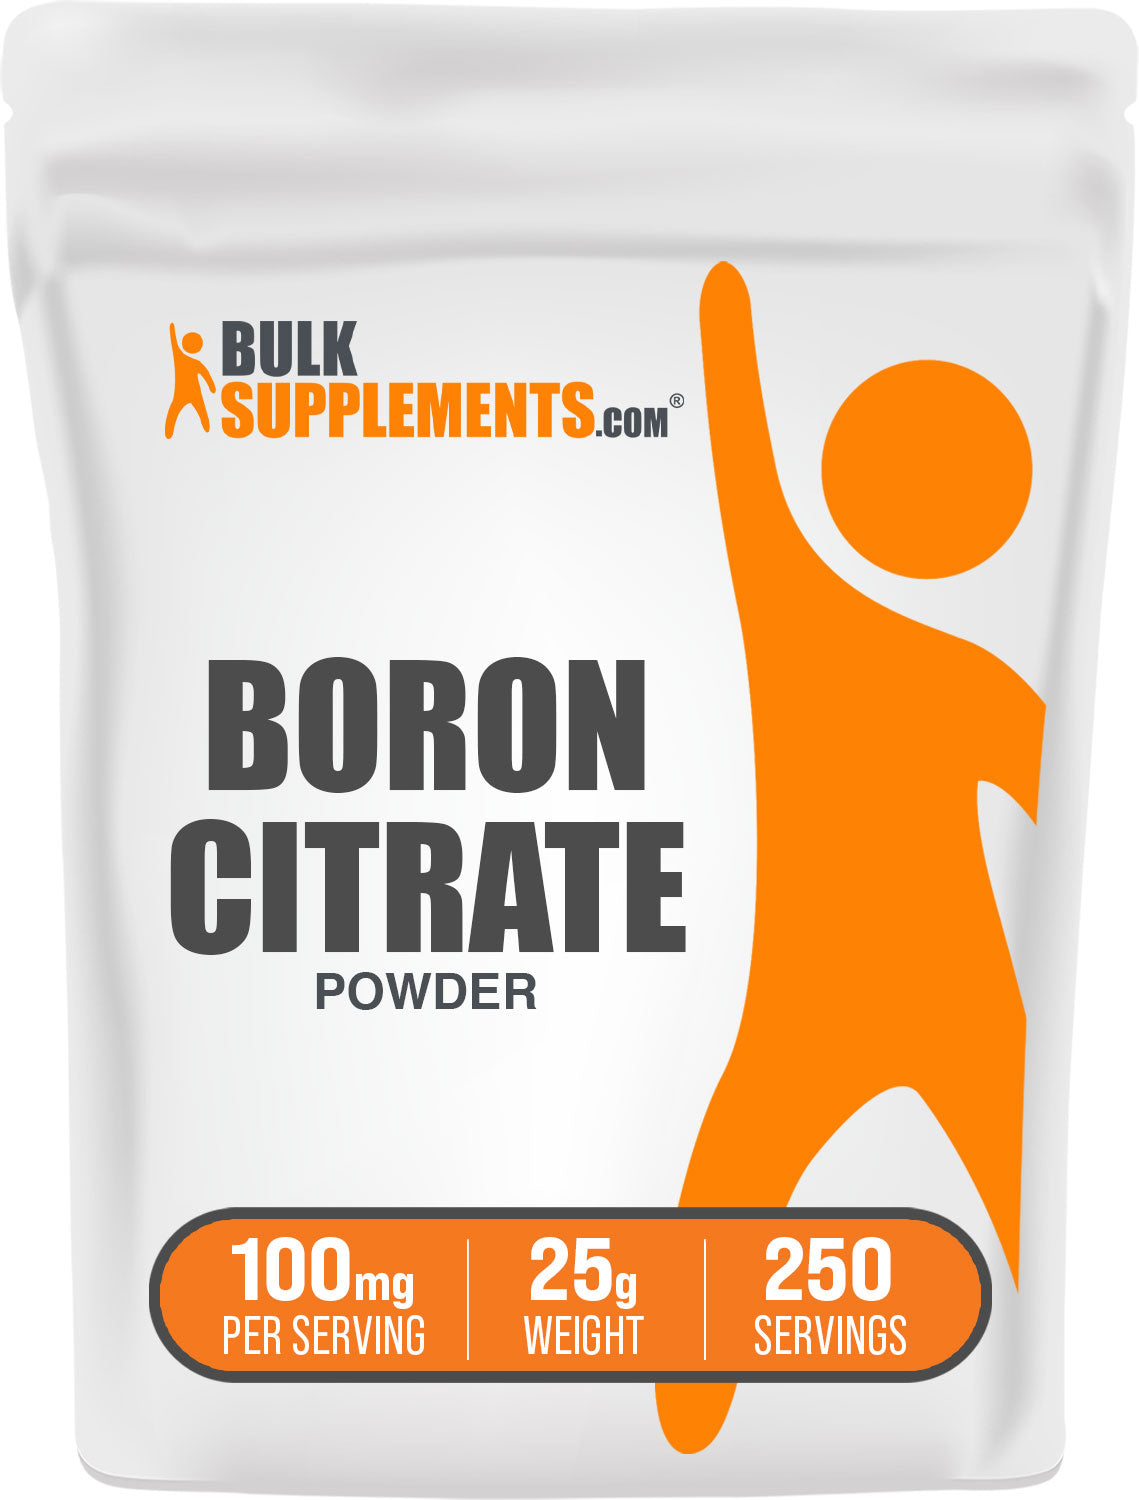 25g of boron citrate